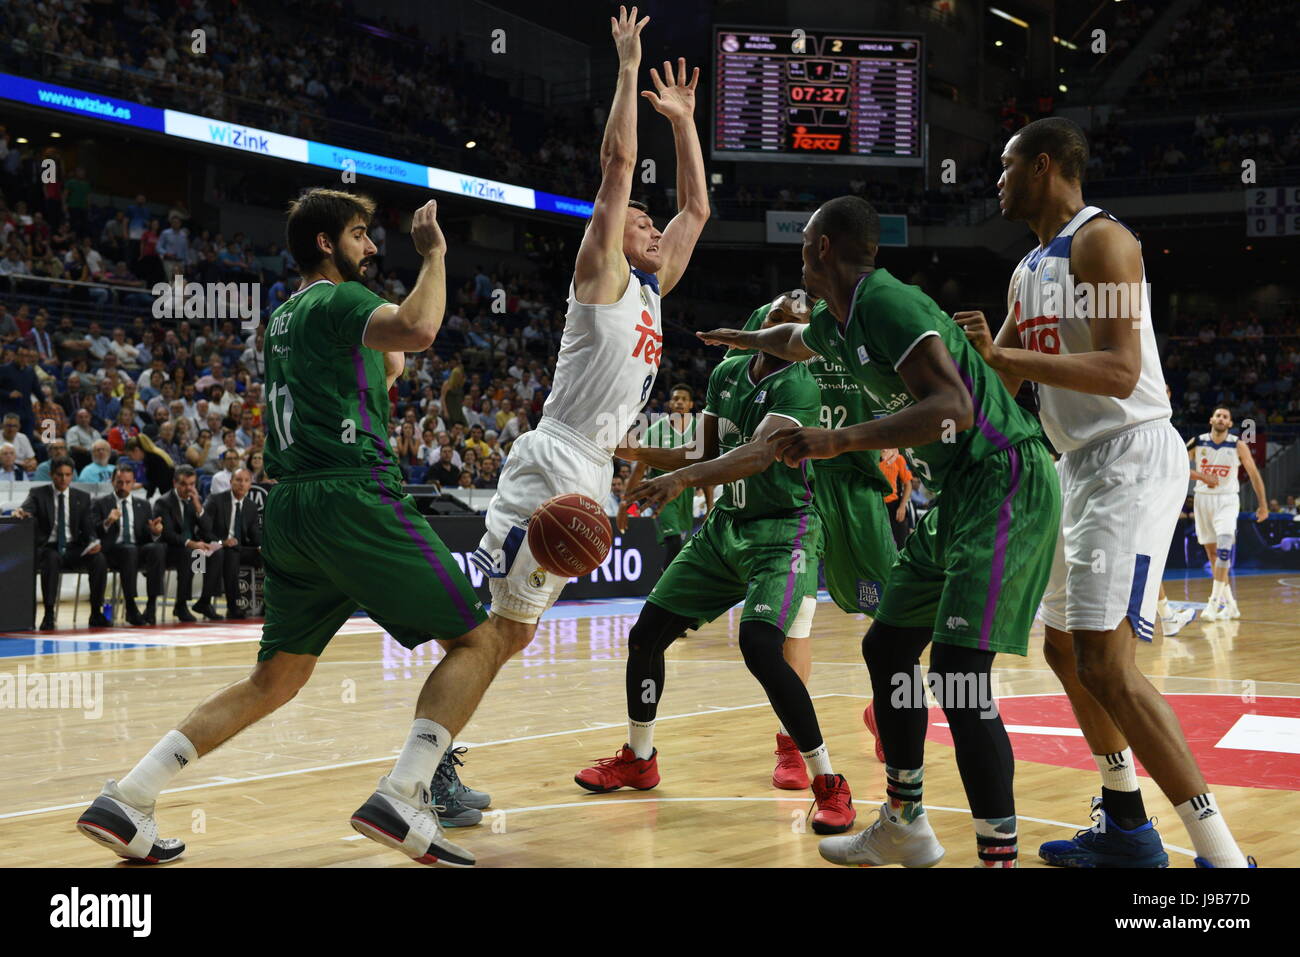 Madrid, Spain. 31st May, 2017. Jonas Maciulis (C) #8 of Real Madrid in action during the first game of the semifinals of basketball Endesa league between Real Madrid and Unicaja de Málaga. Credit: Jorge Sanz/Pacific Press/Alamy Live News Stock Photo